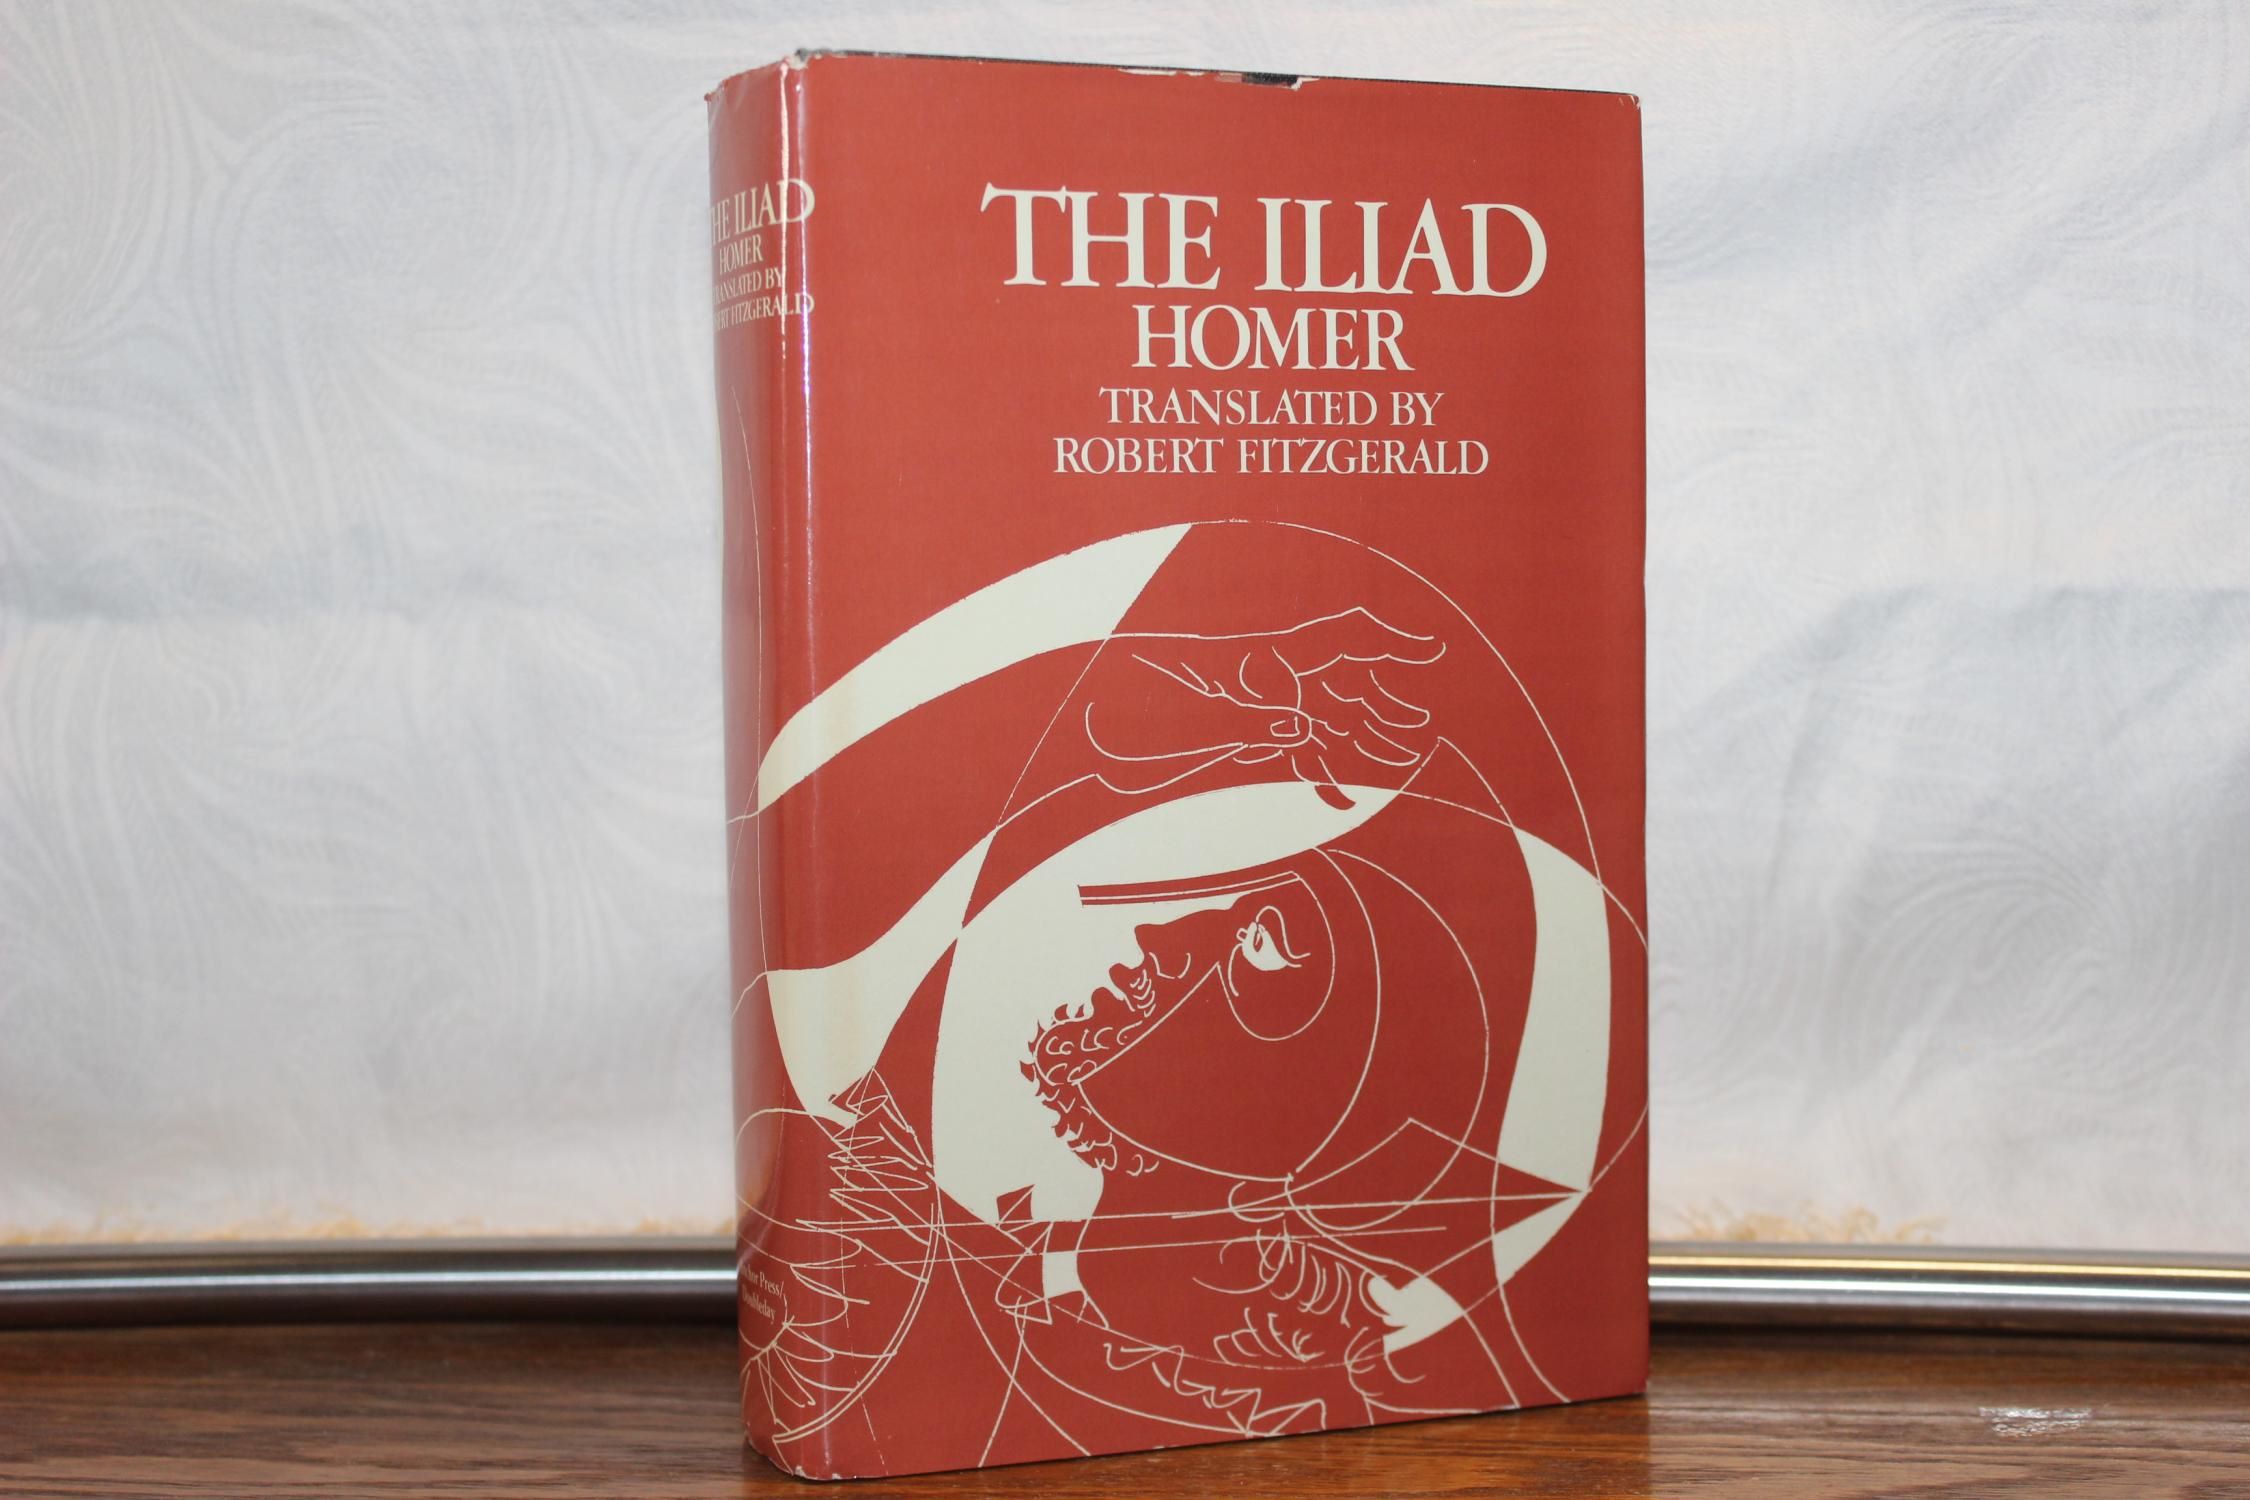 17-mind-blowing-facts-about-the-iliad-homer